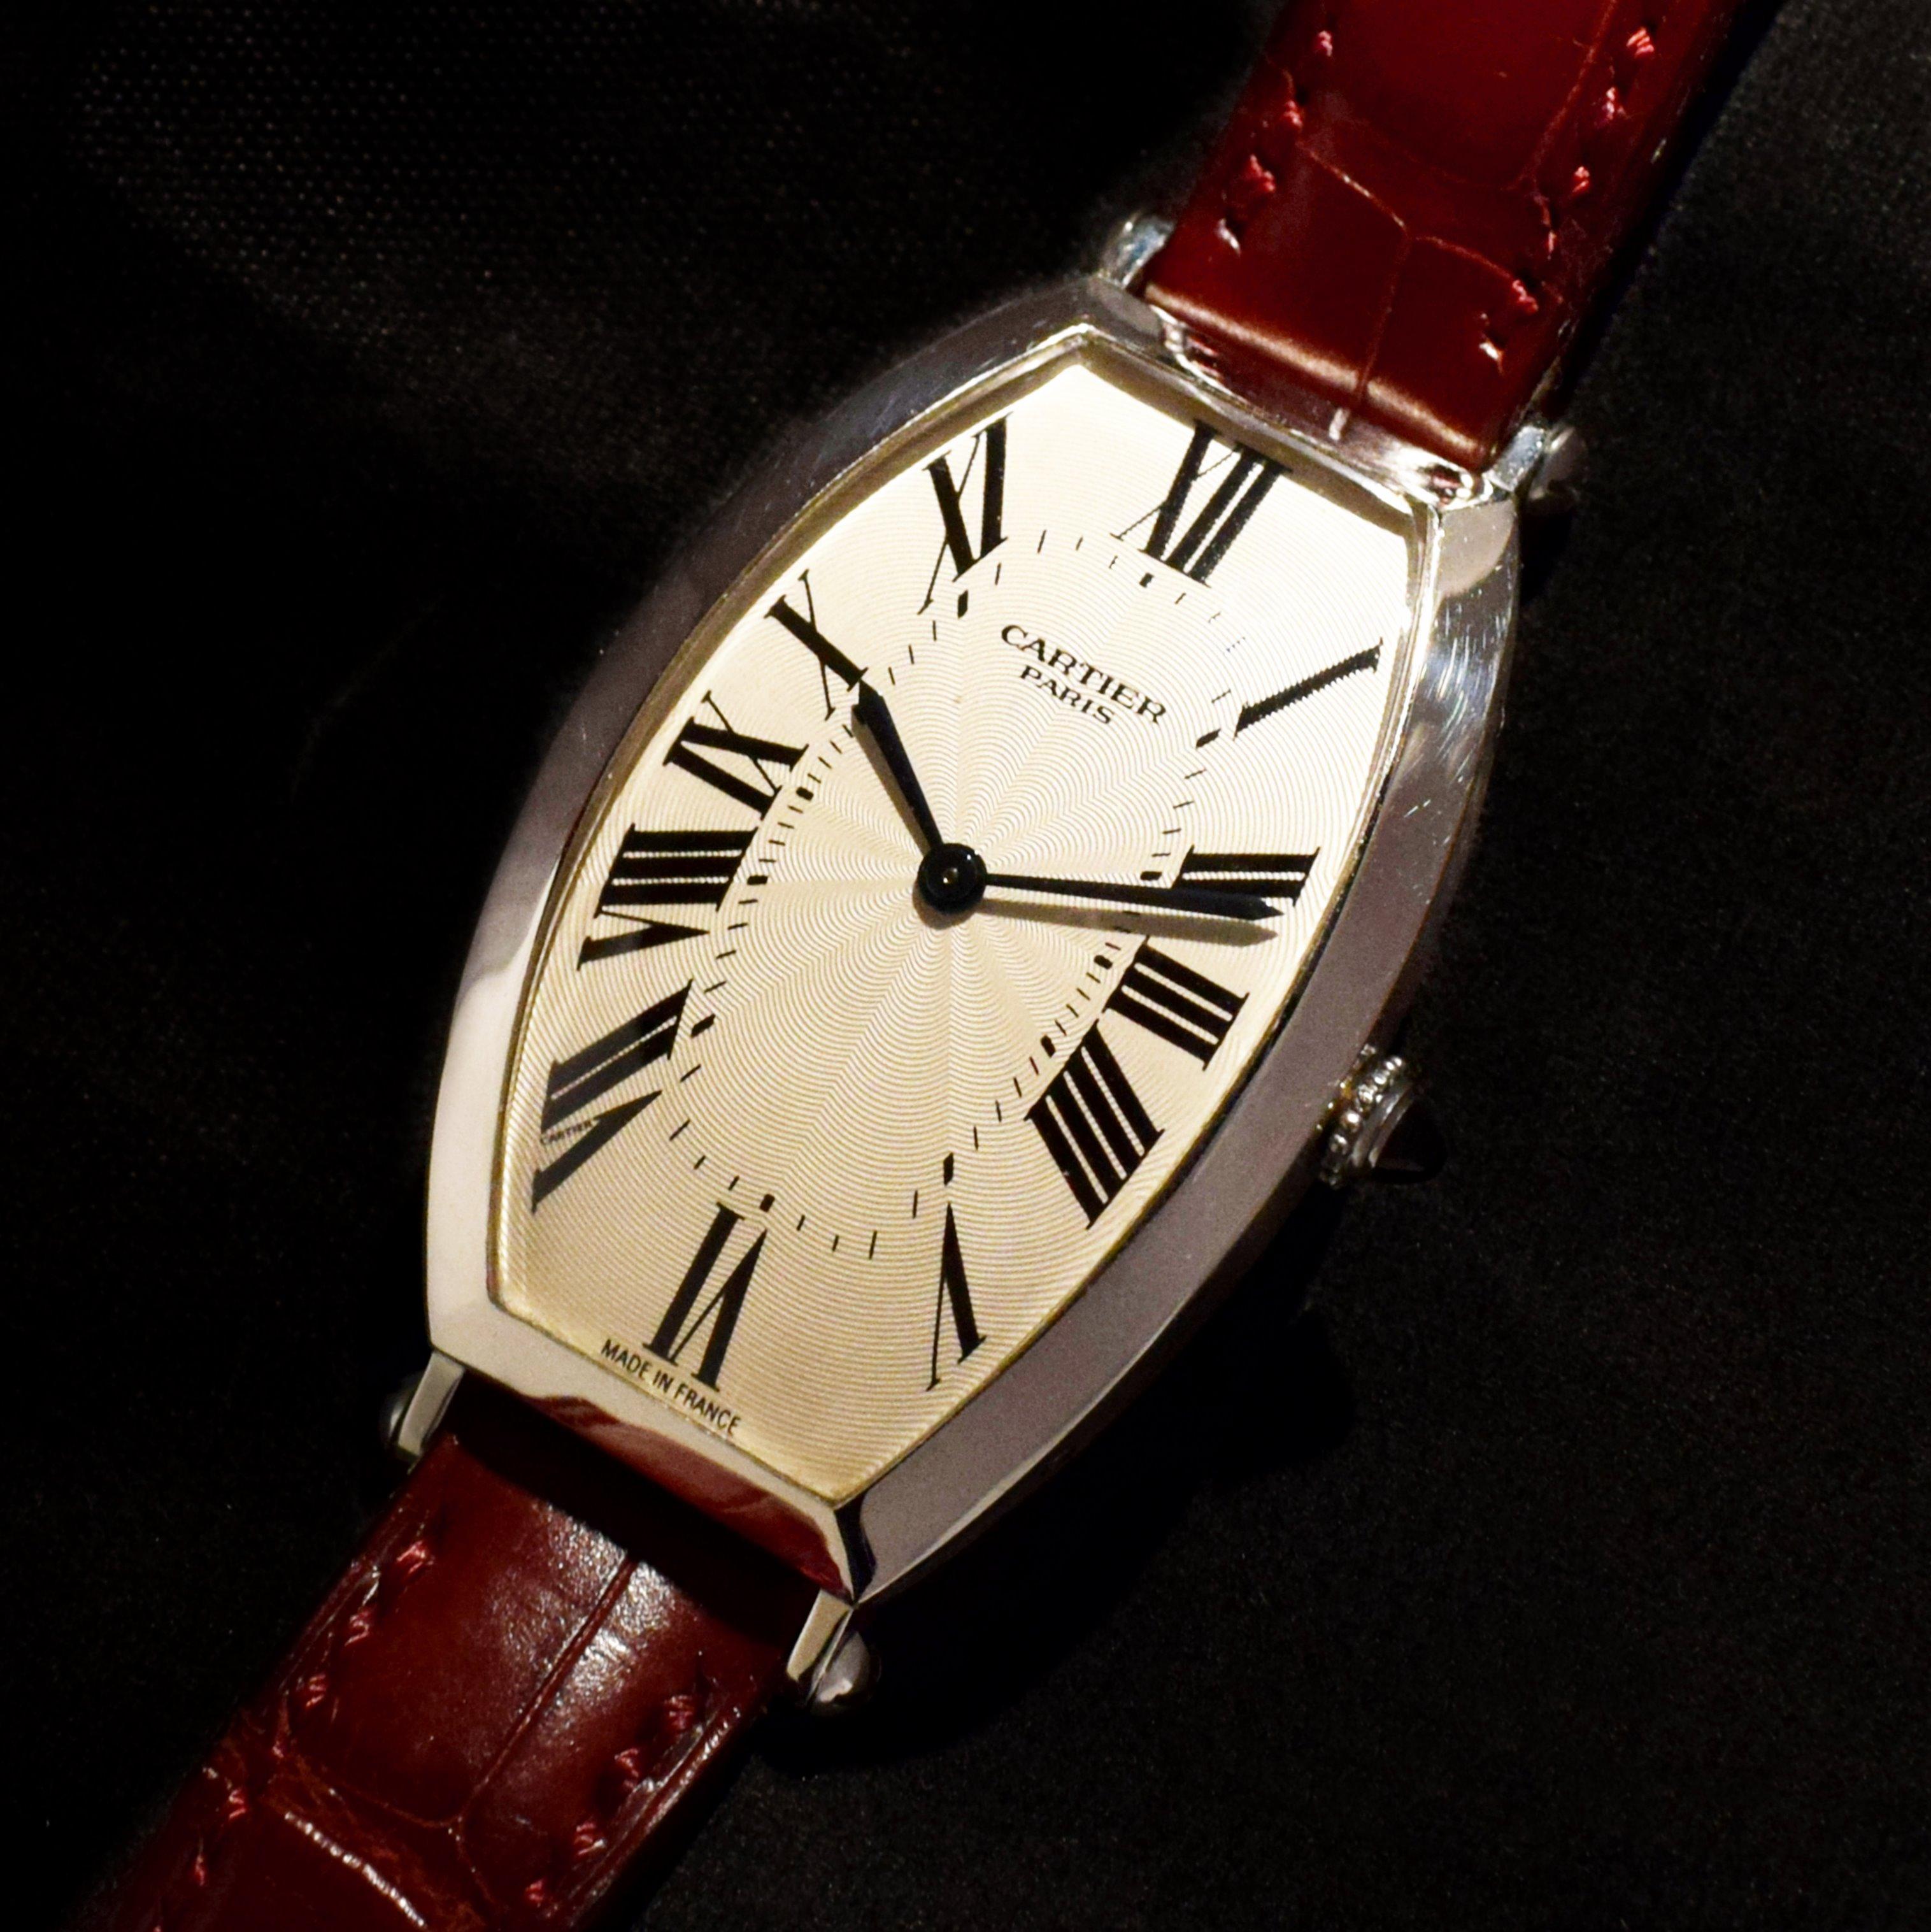 Brand: Cartier
Model: Tonneau 2435B
Year: 1990’s
Serial number: 01xxAF
Reference: C03124
This model 2435B is a re-edition of the large Tonneau wristwatch back in the 1920’s; and this particular model launched in the 1990’s.
Case: Special unique case